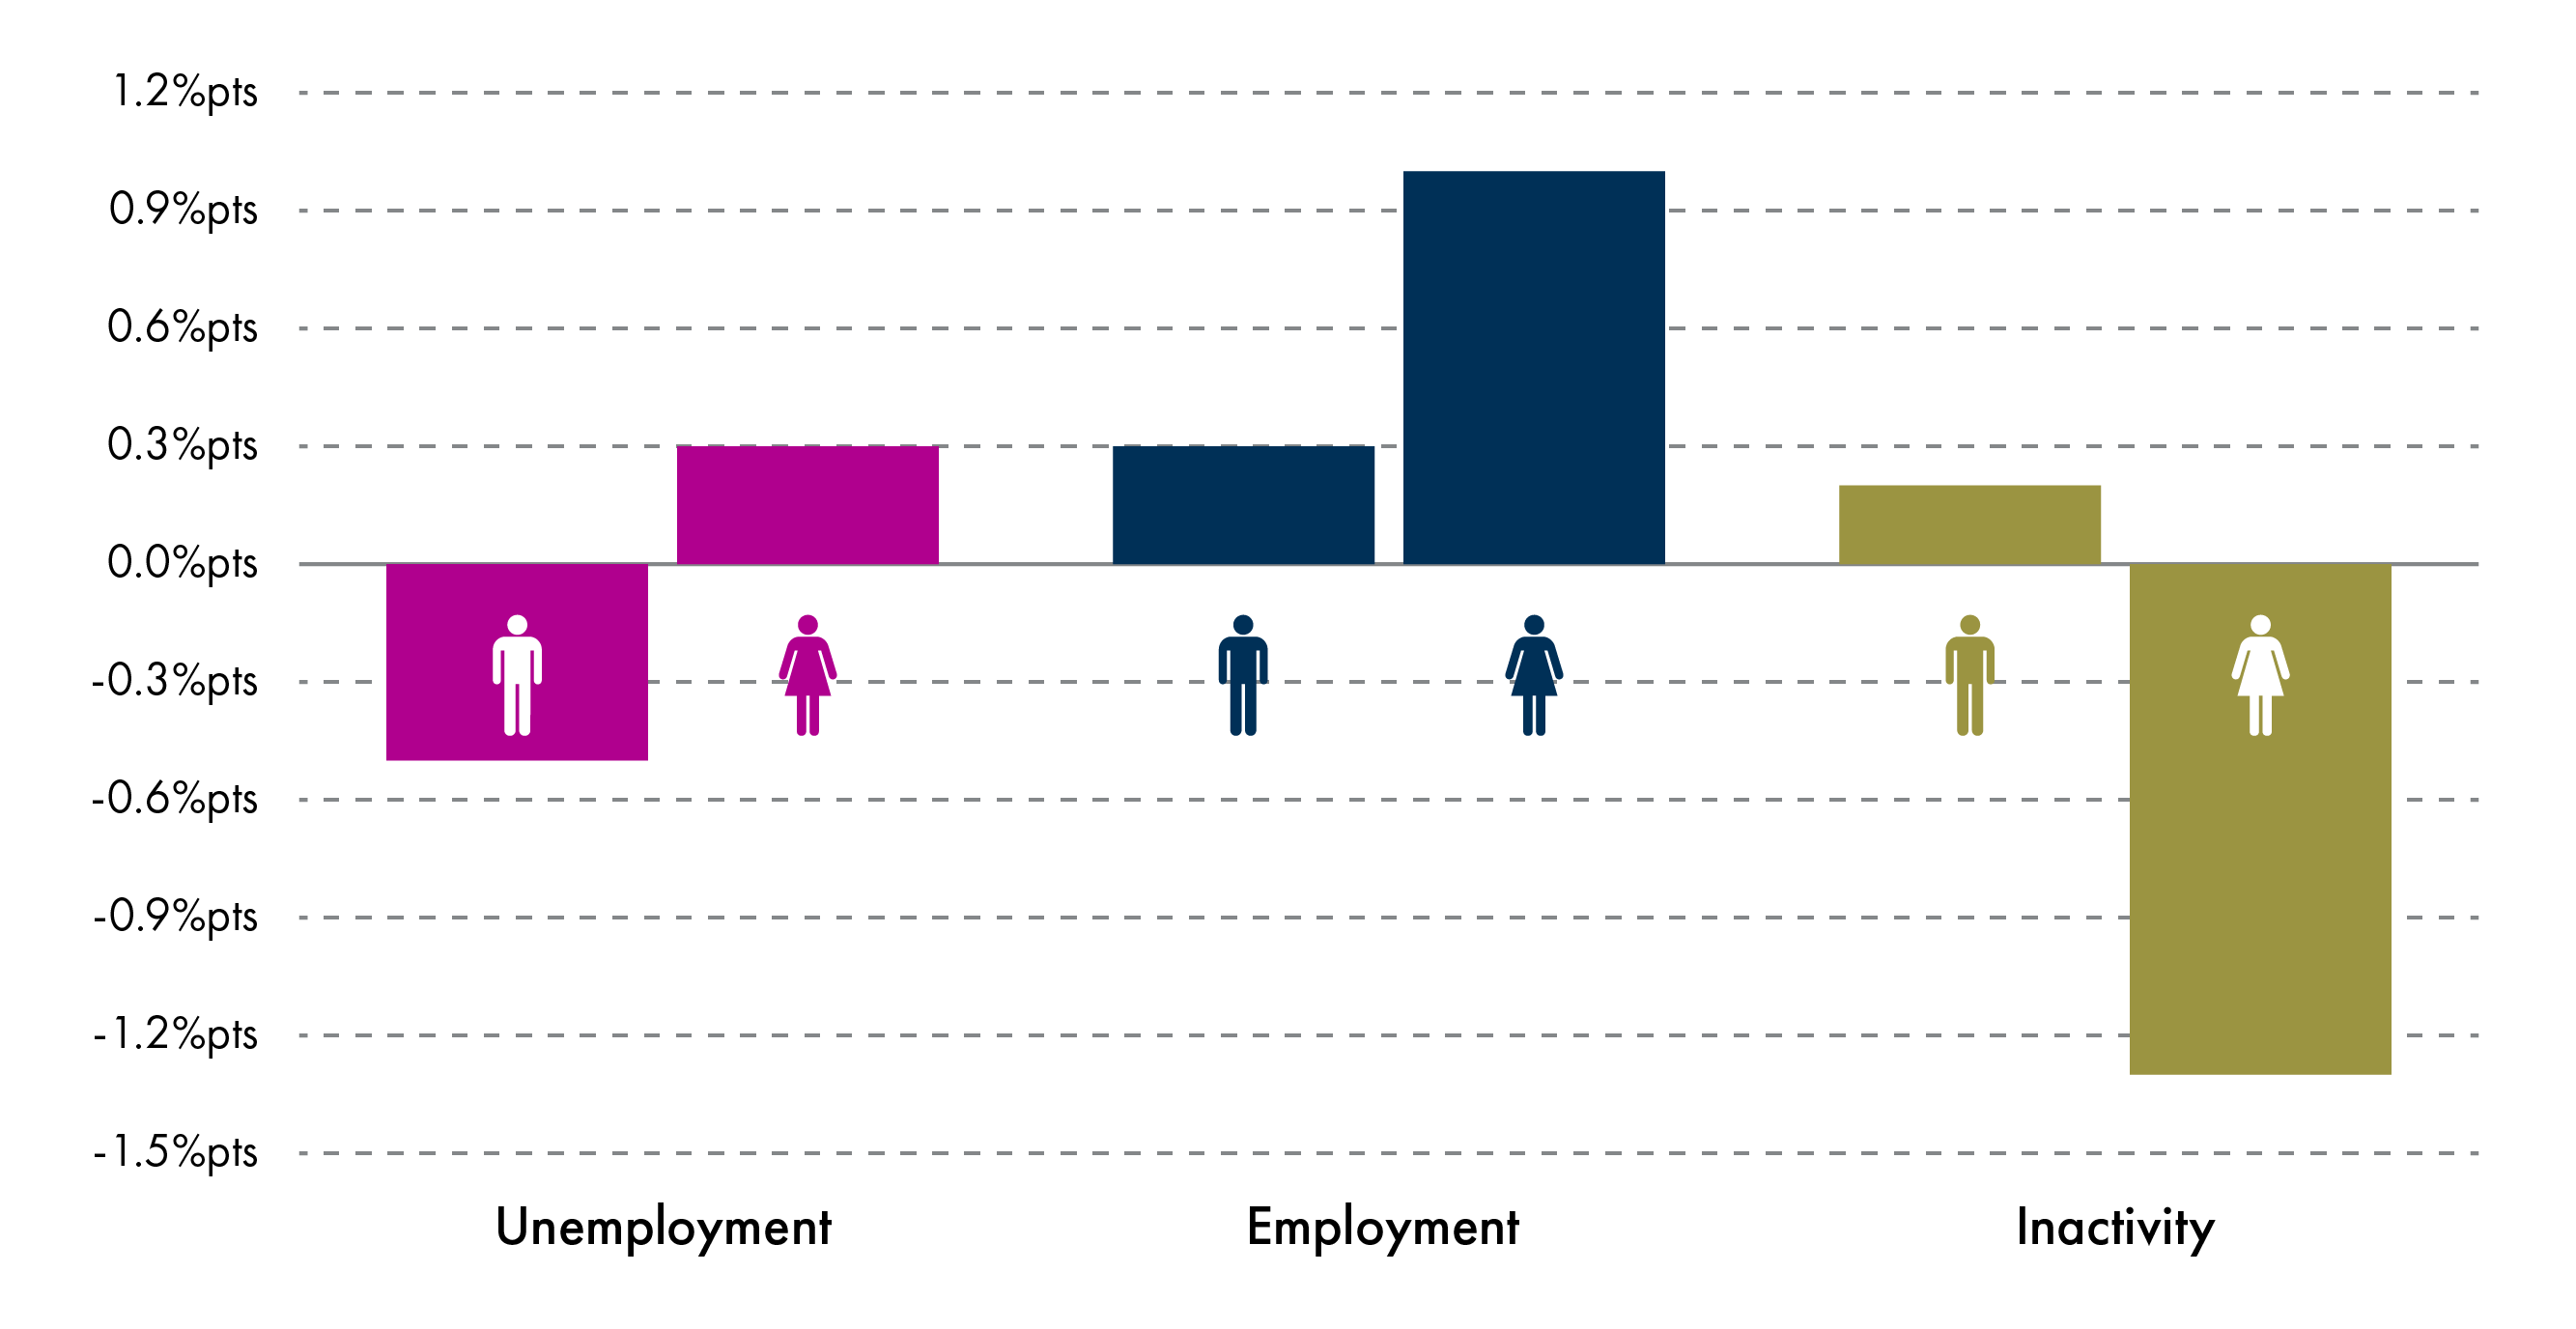 Change in unemployment, employment  and inactivity rates over the quarter by gender.